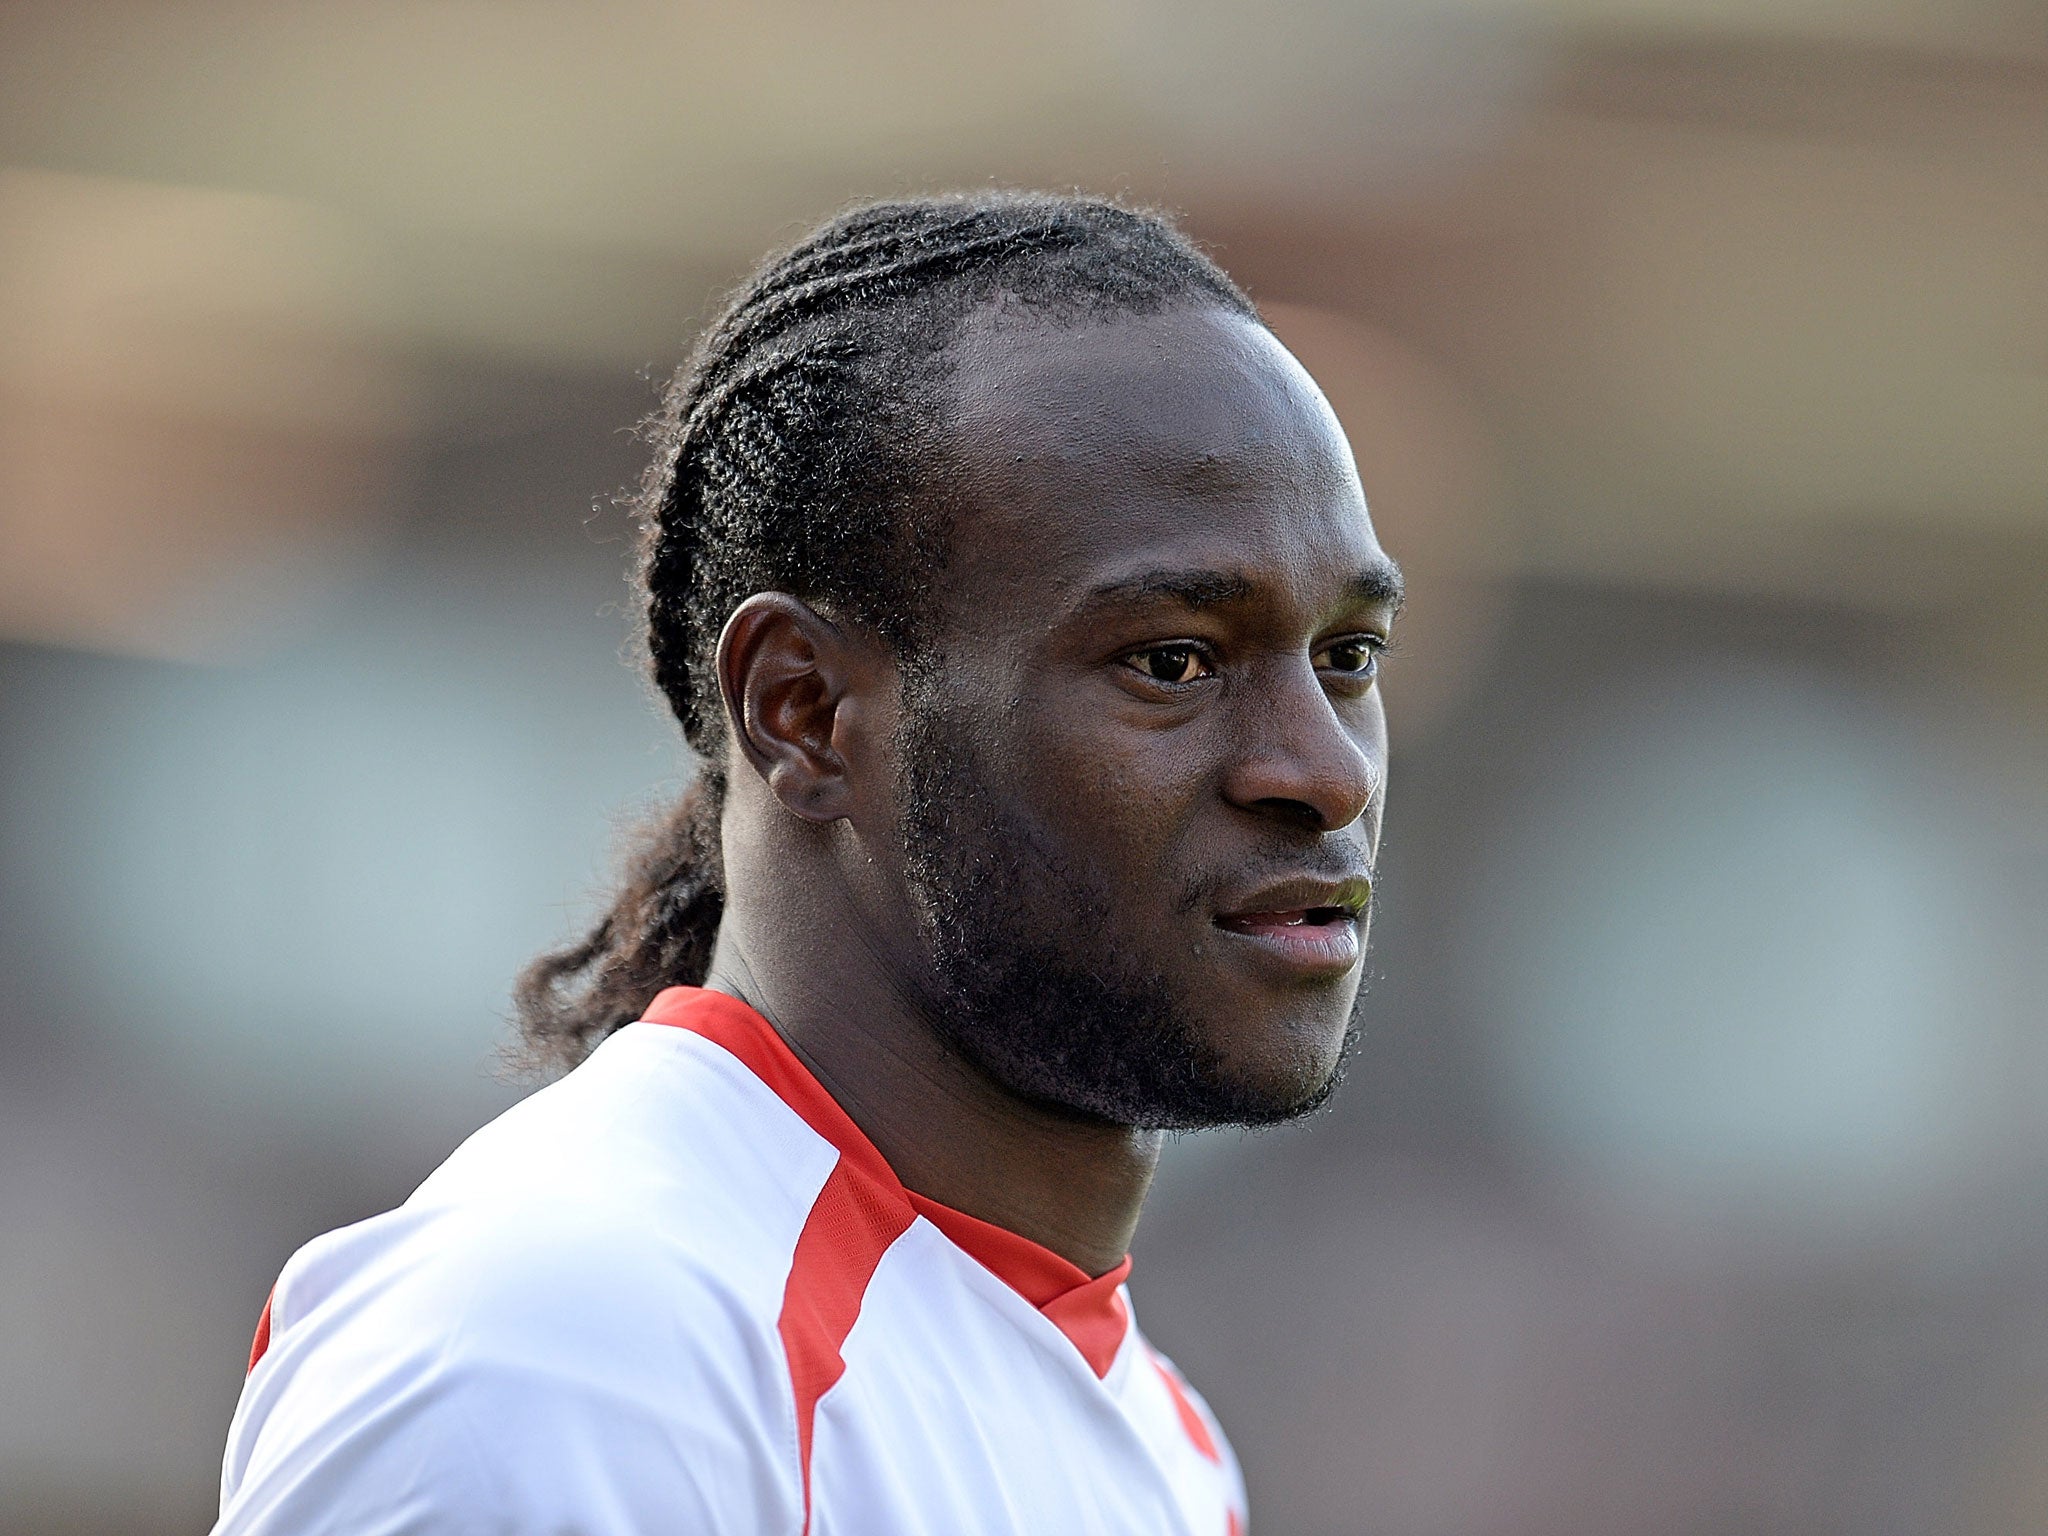 Liverpool manager Brendan Rodgers has hinted he could look into the possibility of signing Victor Moses from Chelsea on a permanent deal